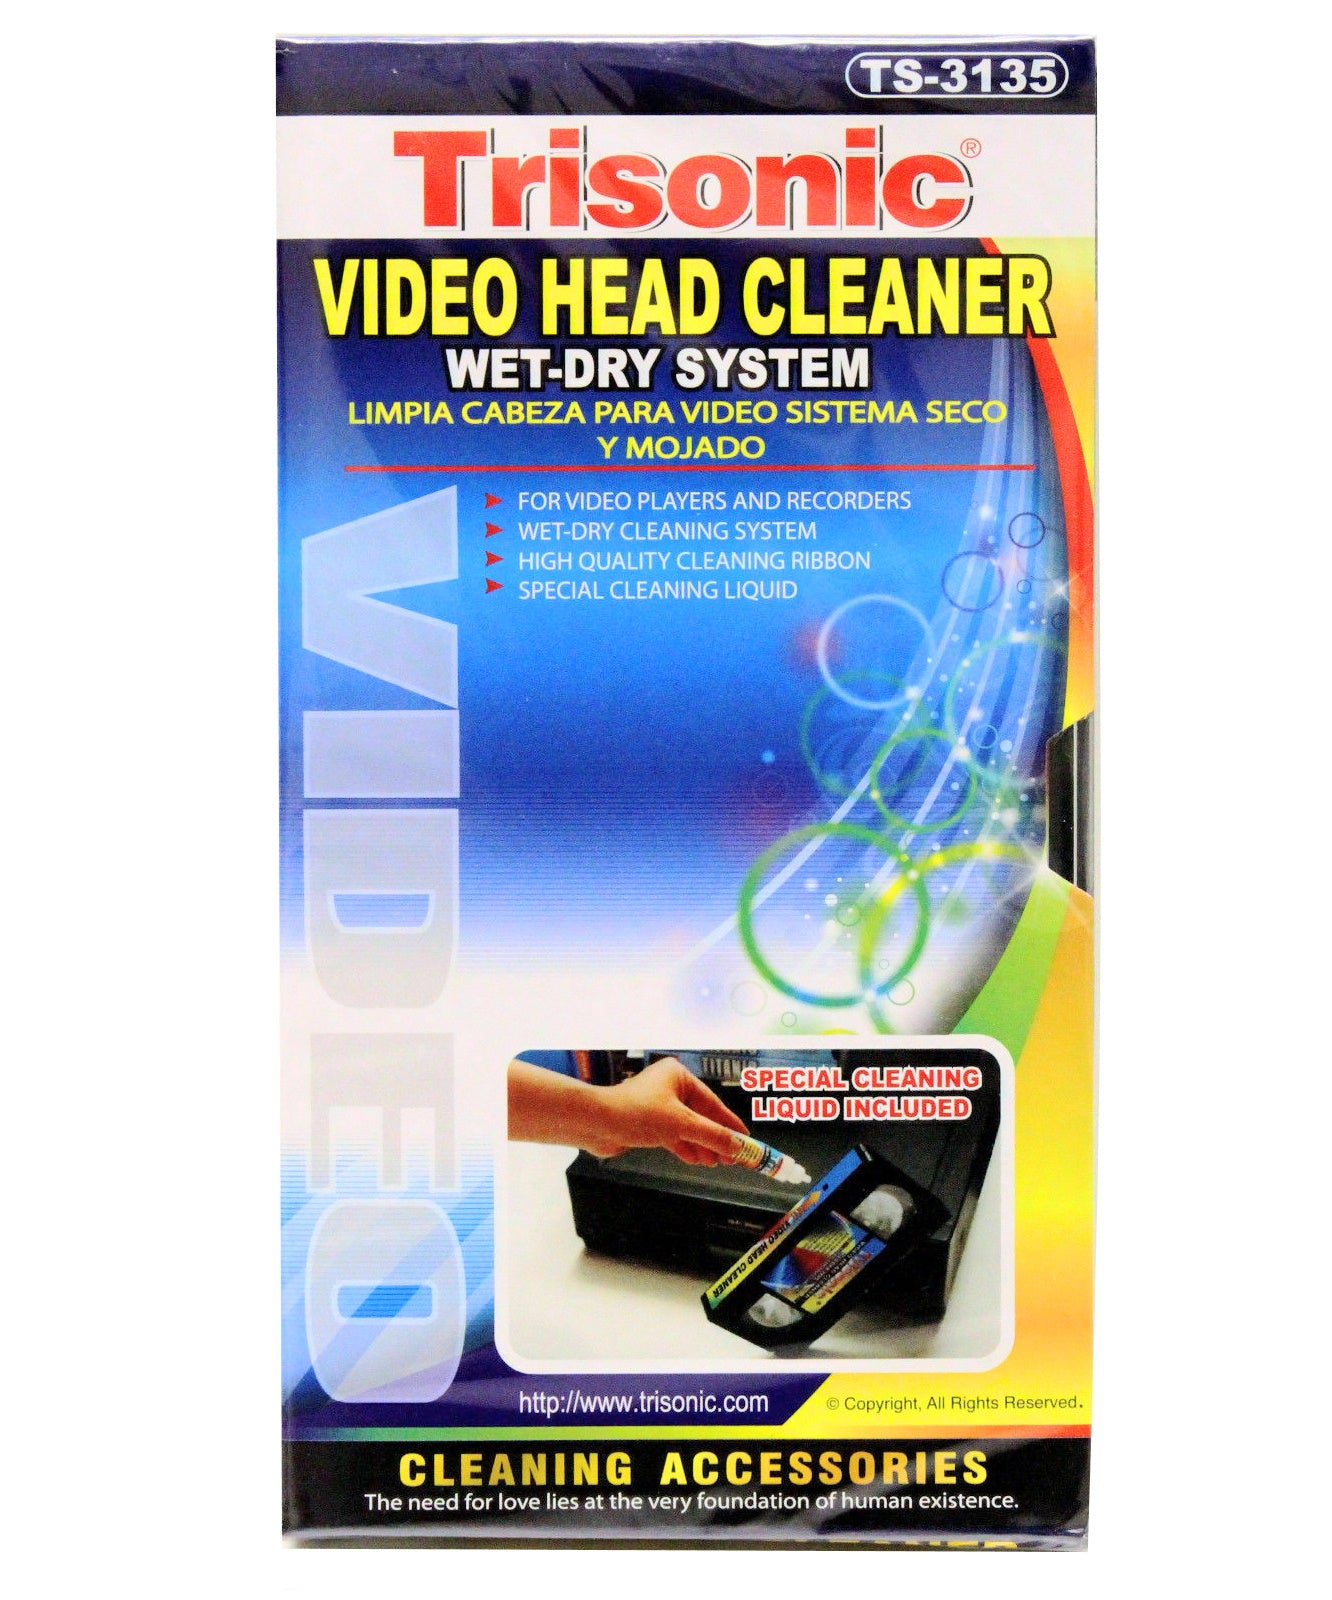 Trisonic Video Head Cleaner, Wet or Dry, Video Players and Recorders, Cleaning Liquid